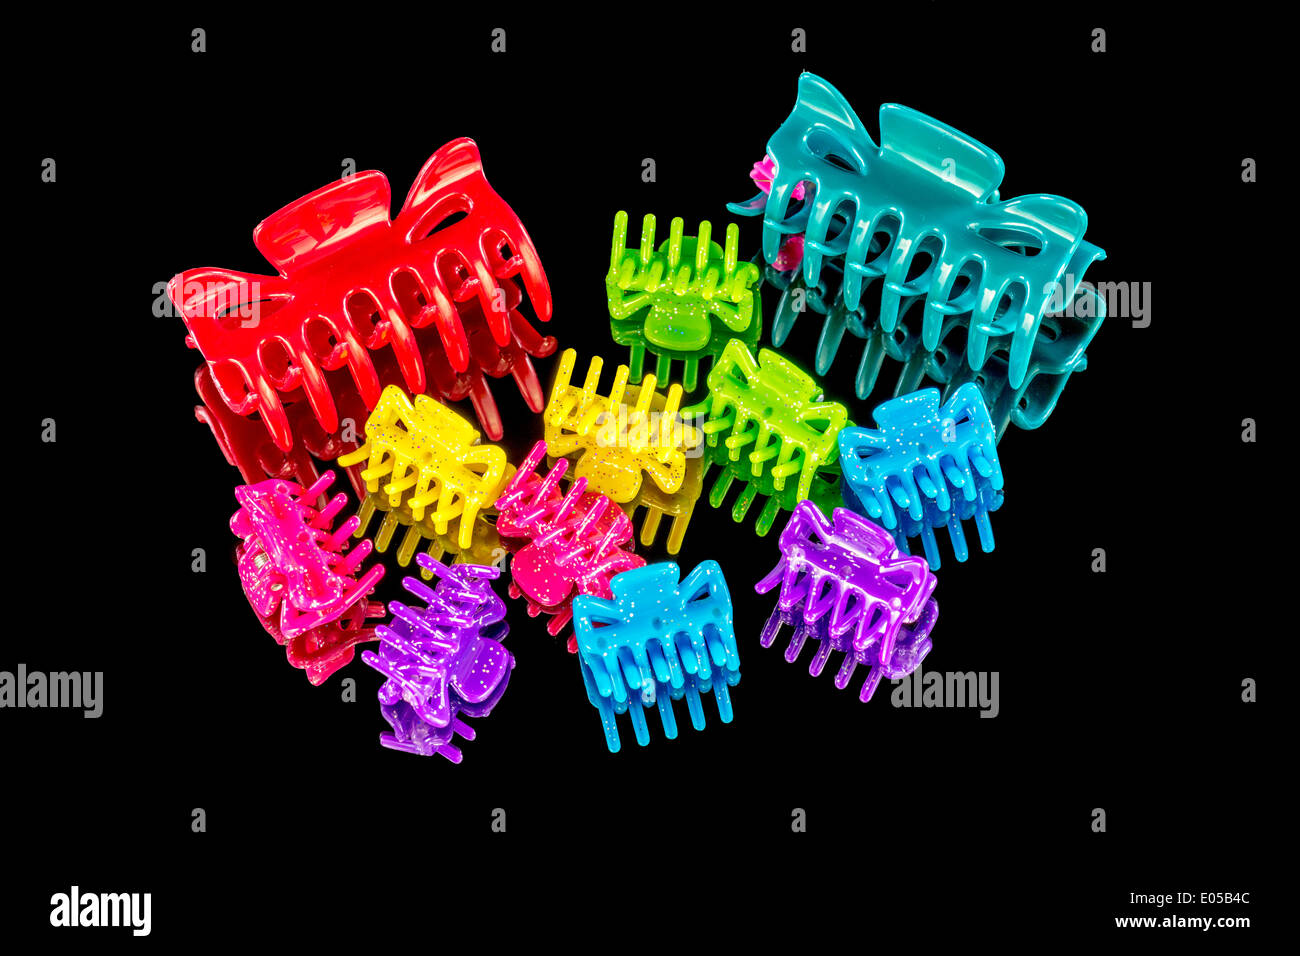 Young girls hair clips of different colors Stock Photo